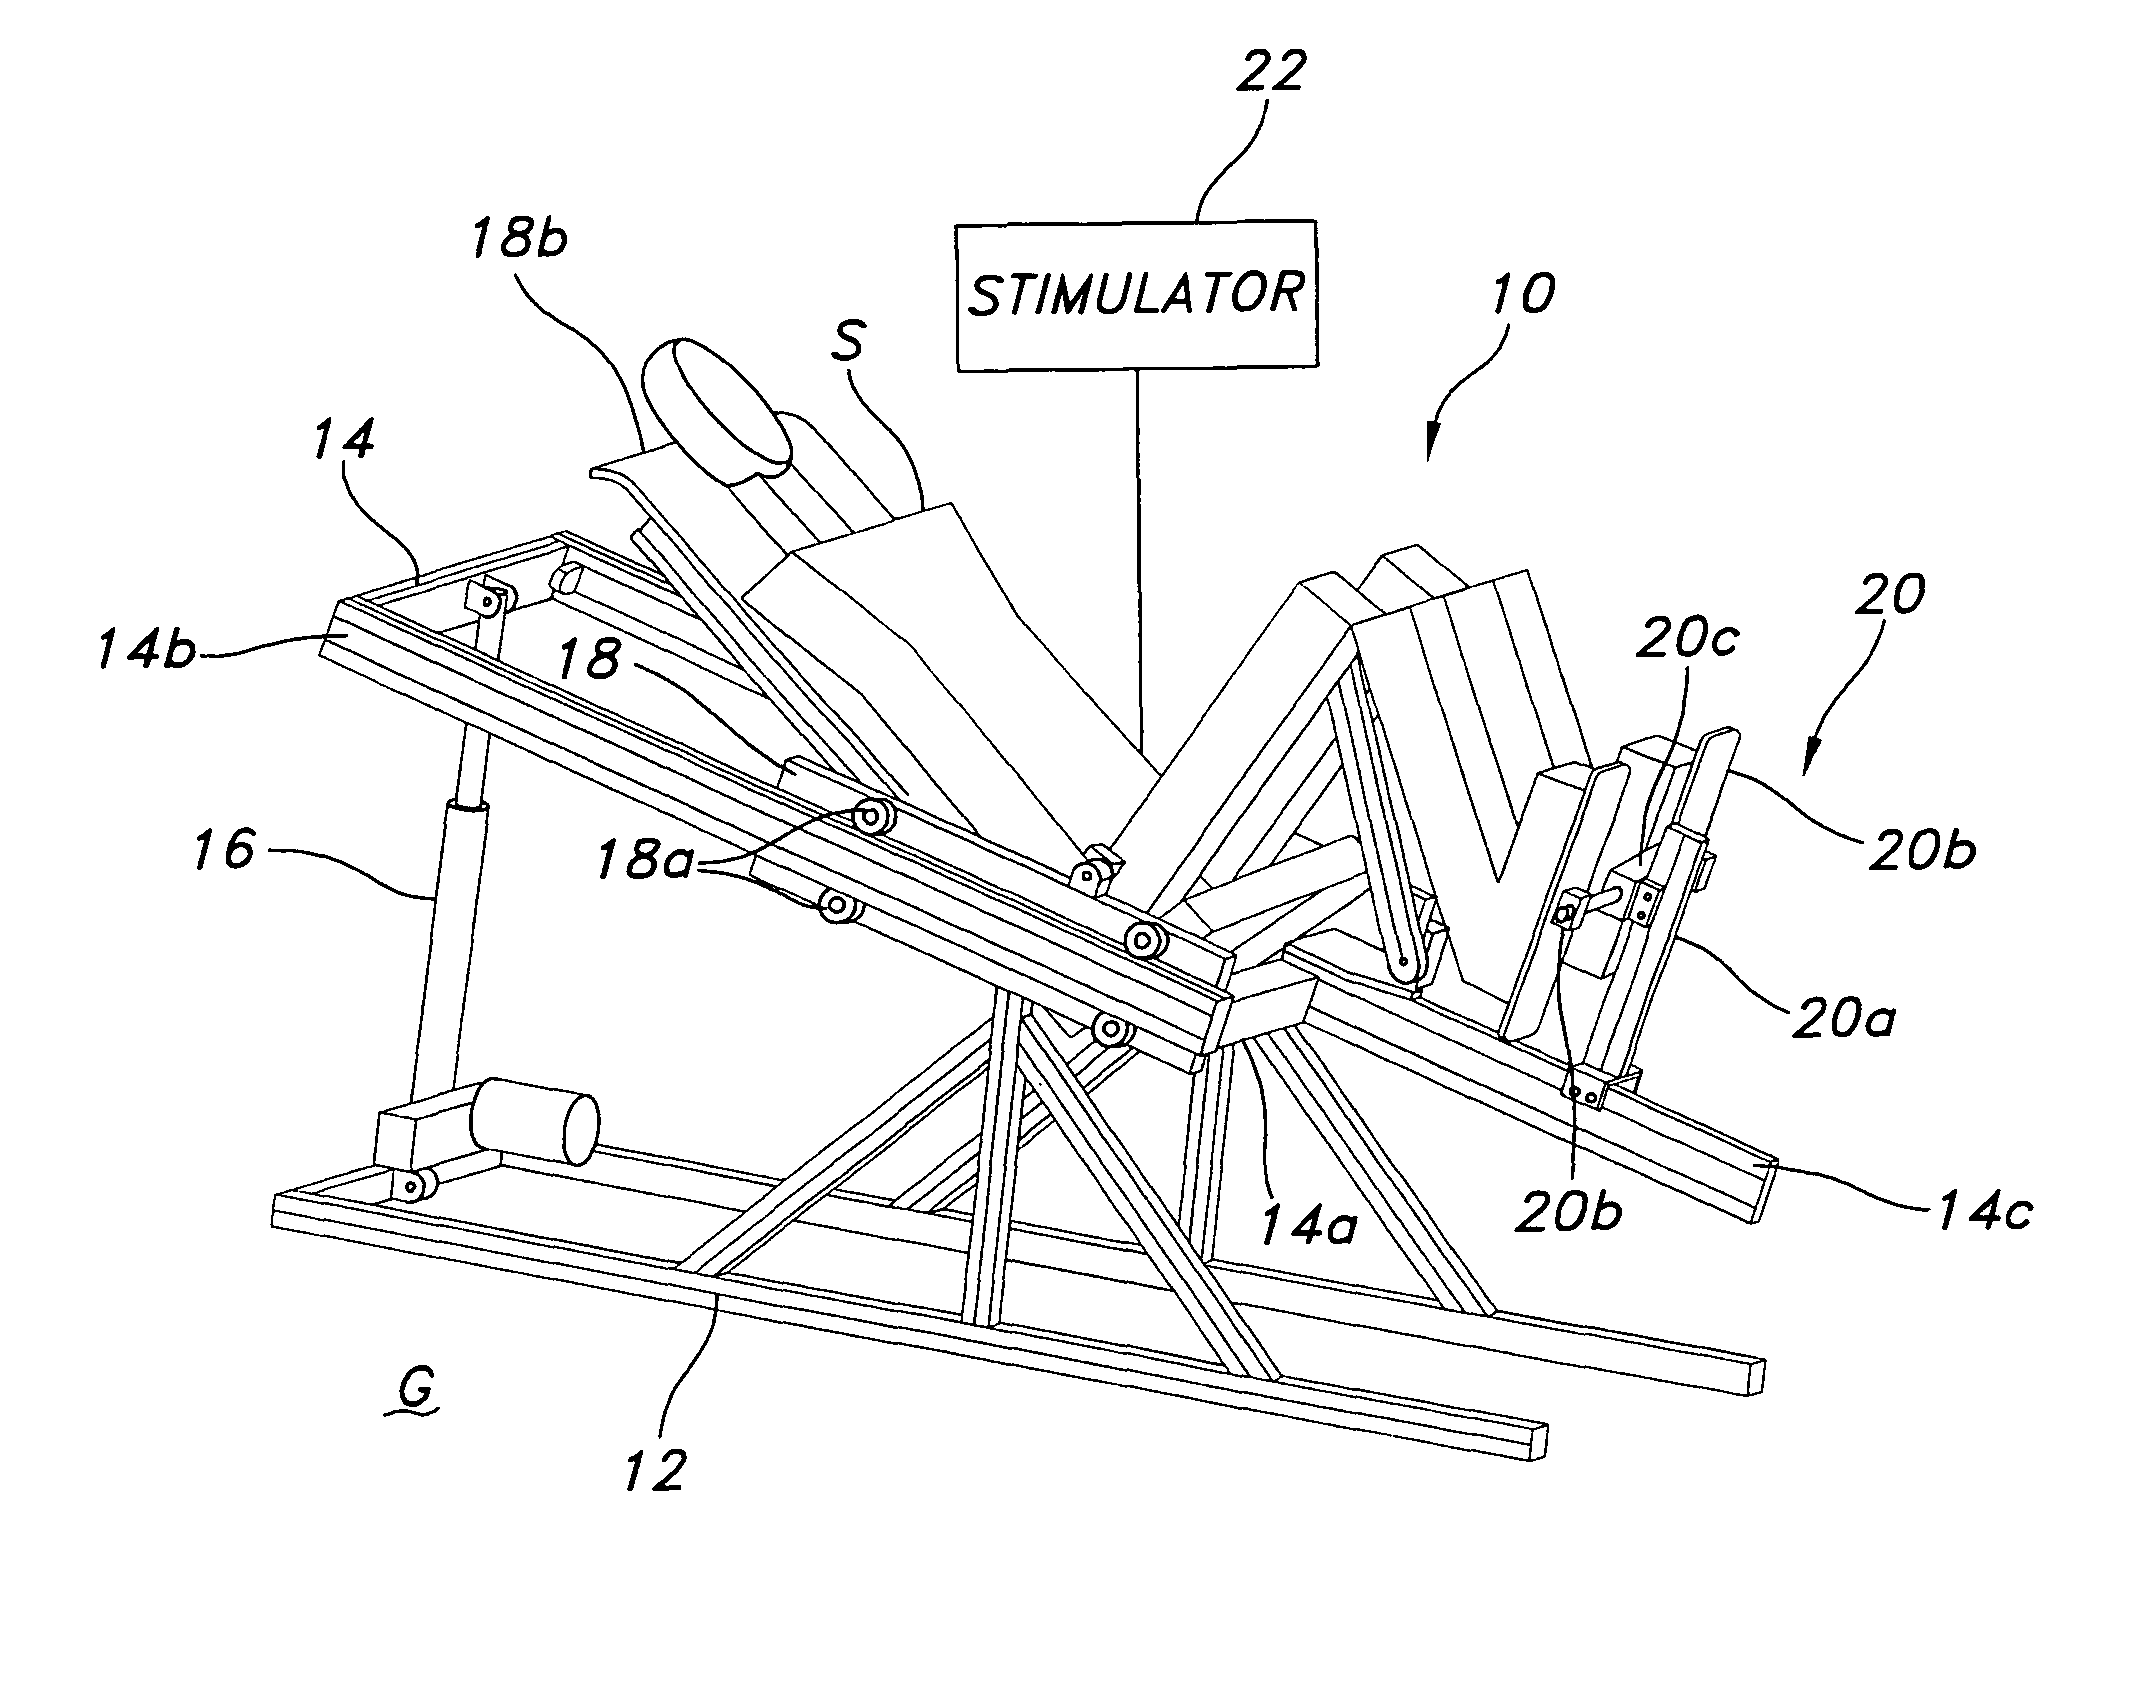 Lower extremity exercise device with stimulation and related methods